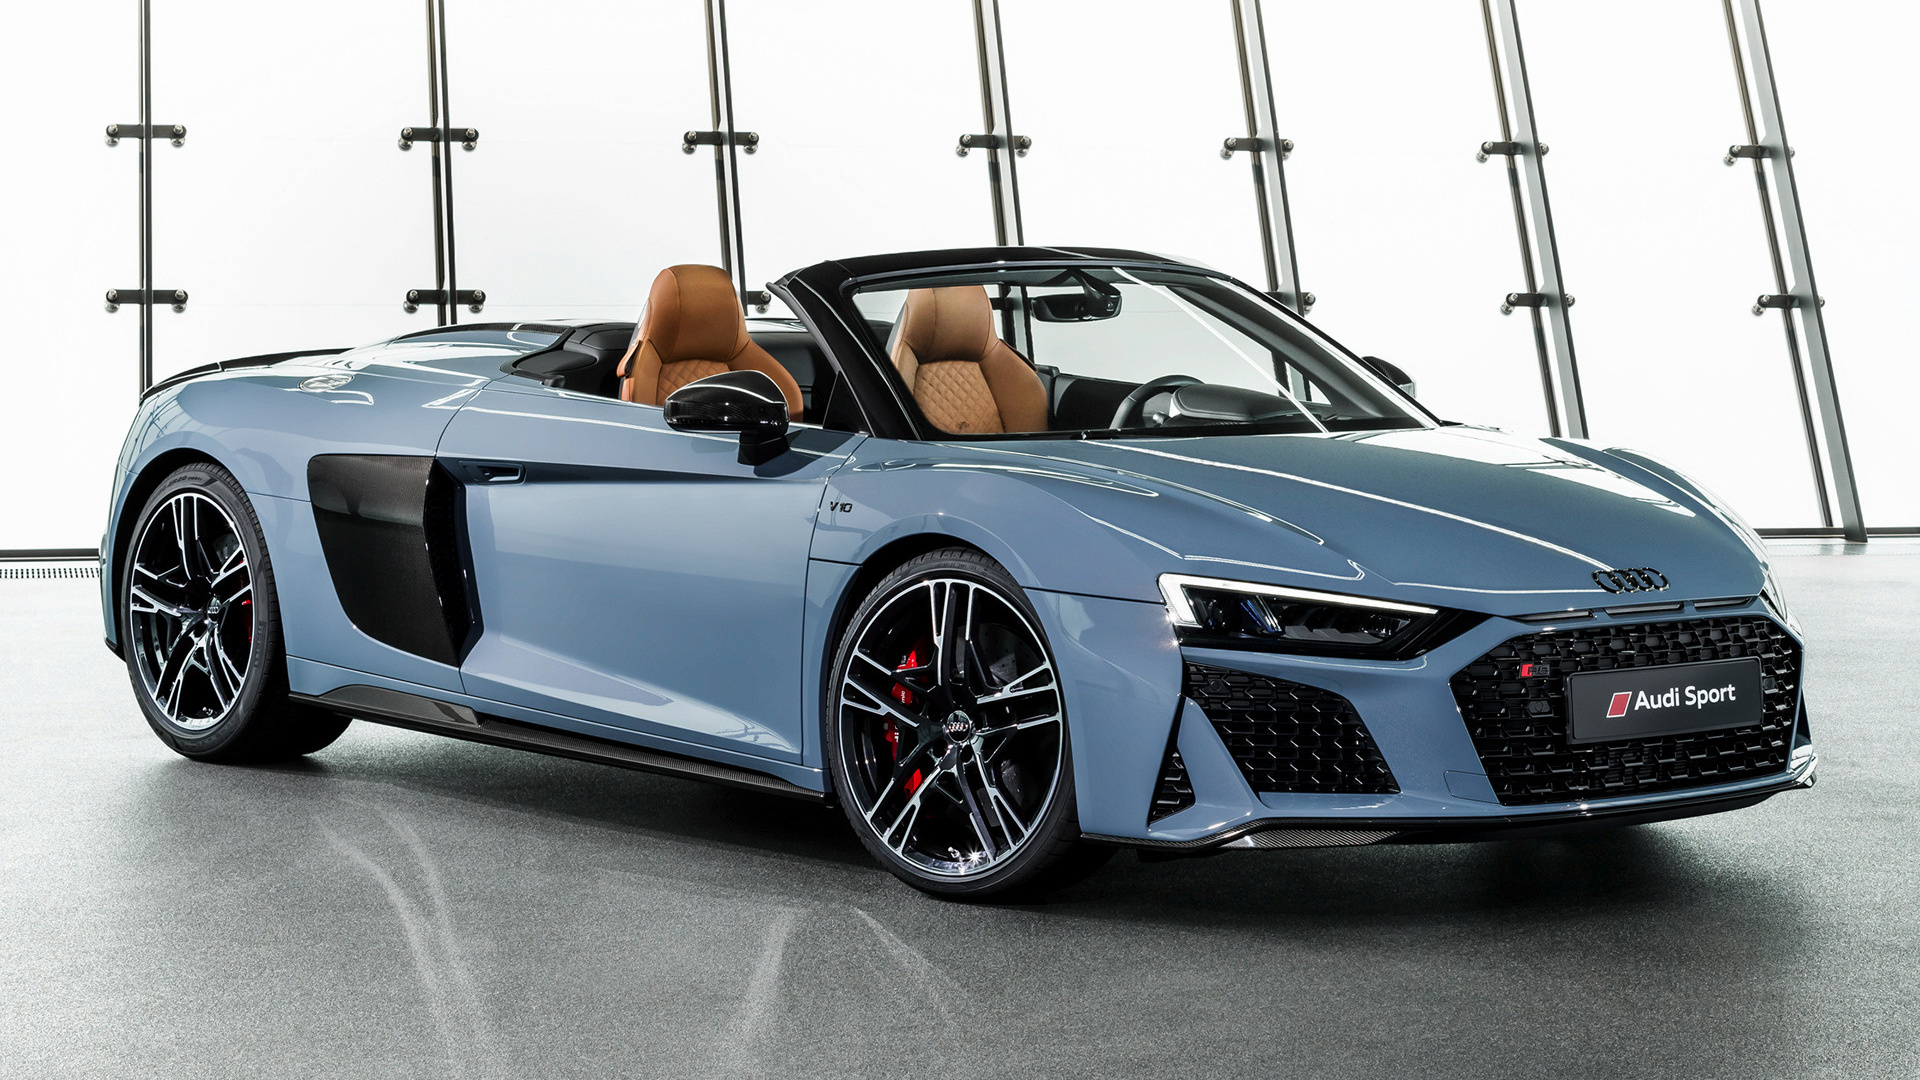 2019 Audi R8 Spyder Performance Wallpapers And Hd Images Car Pixel